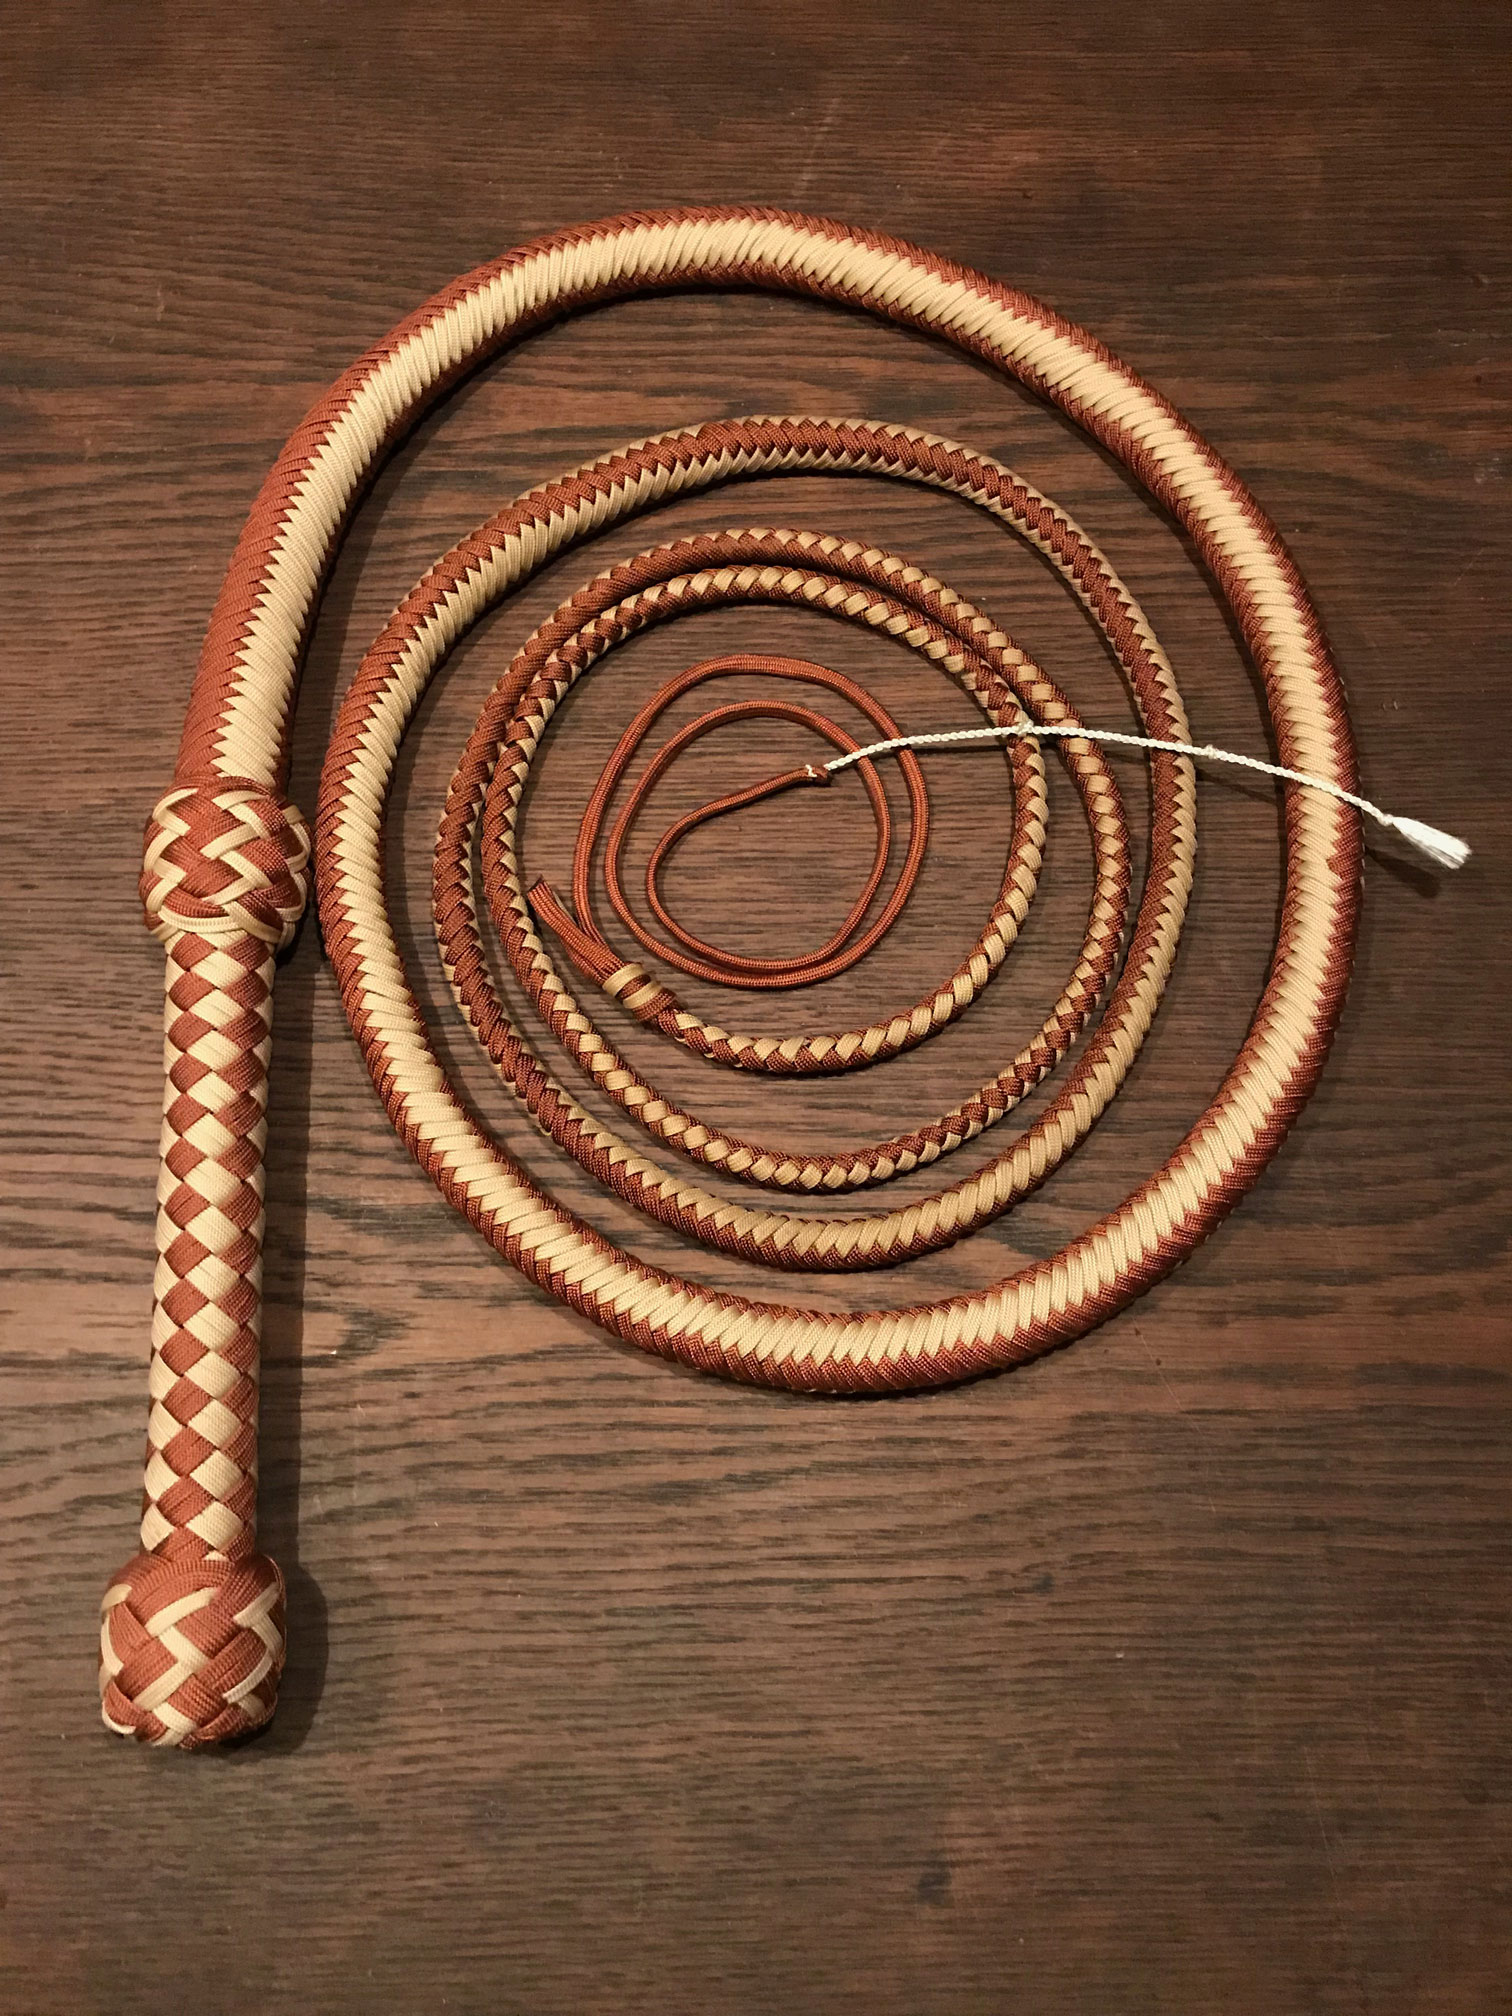 10ft. Paracord